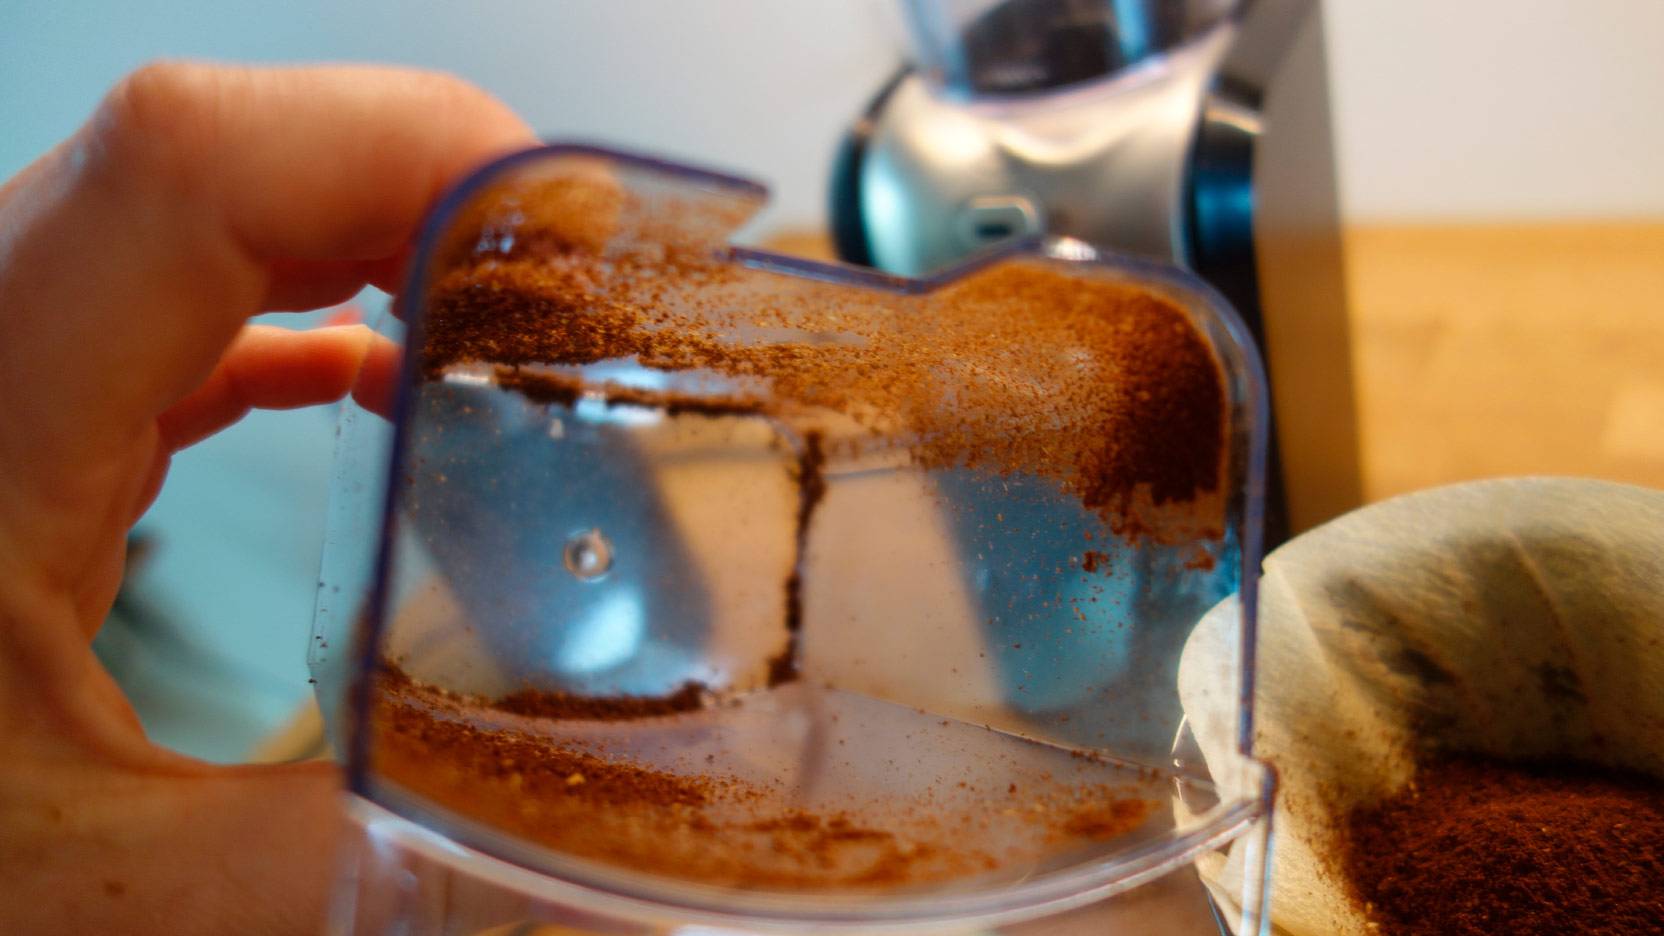 Image of coffee clinging to the container with the ground coffee